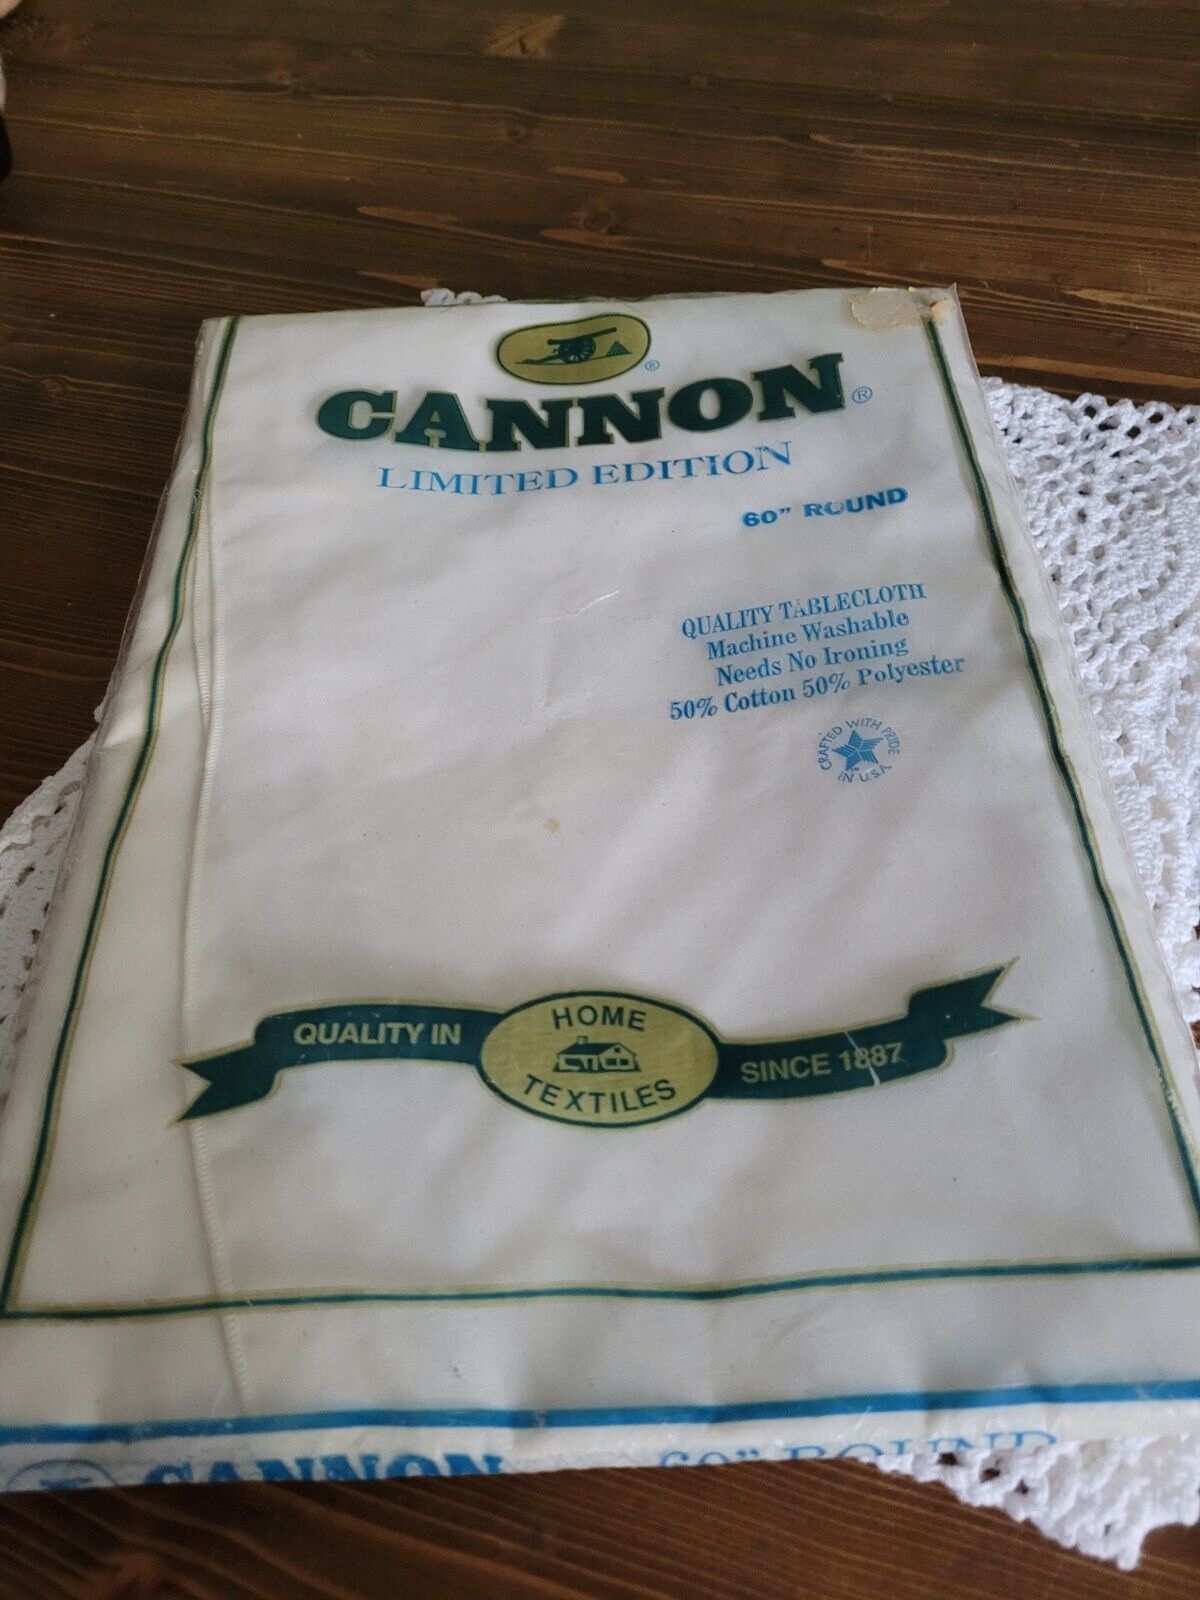 CANNON Limited Edition round TABLECLOTH 60 inches - $12.19